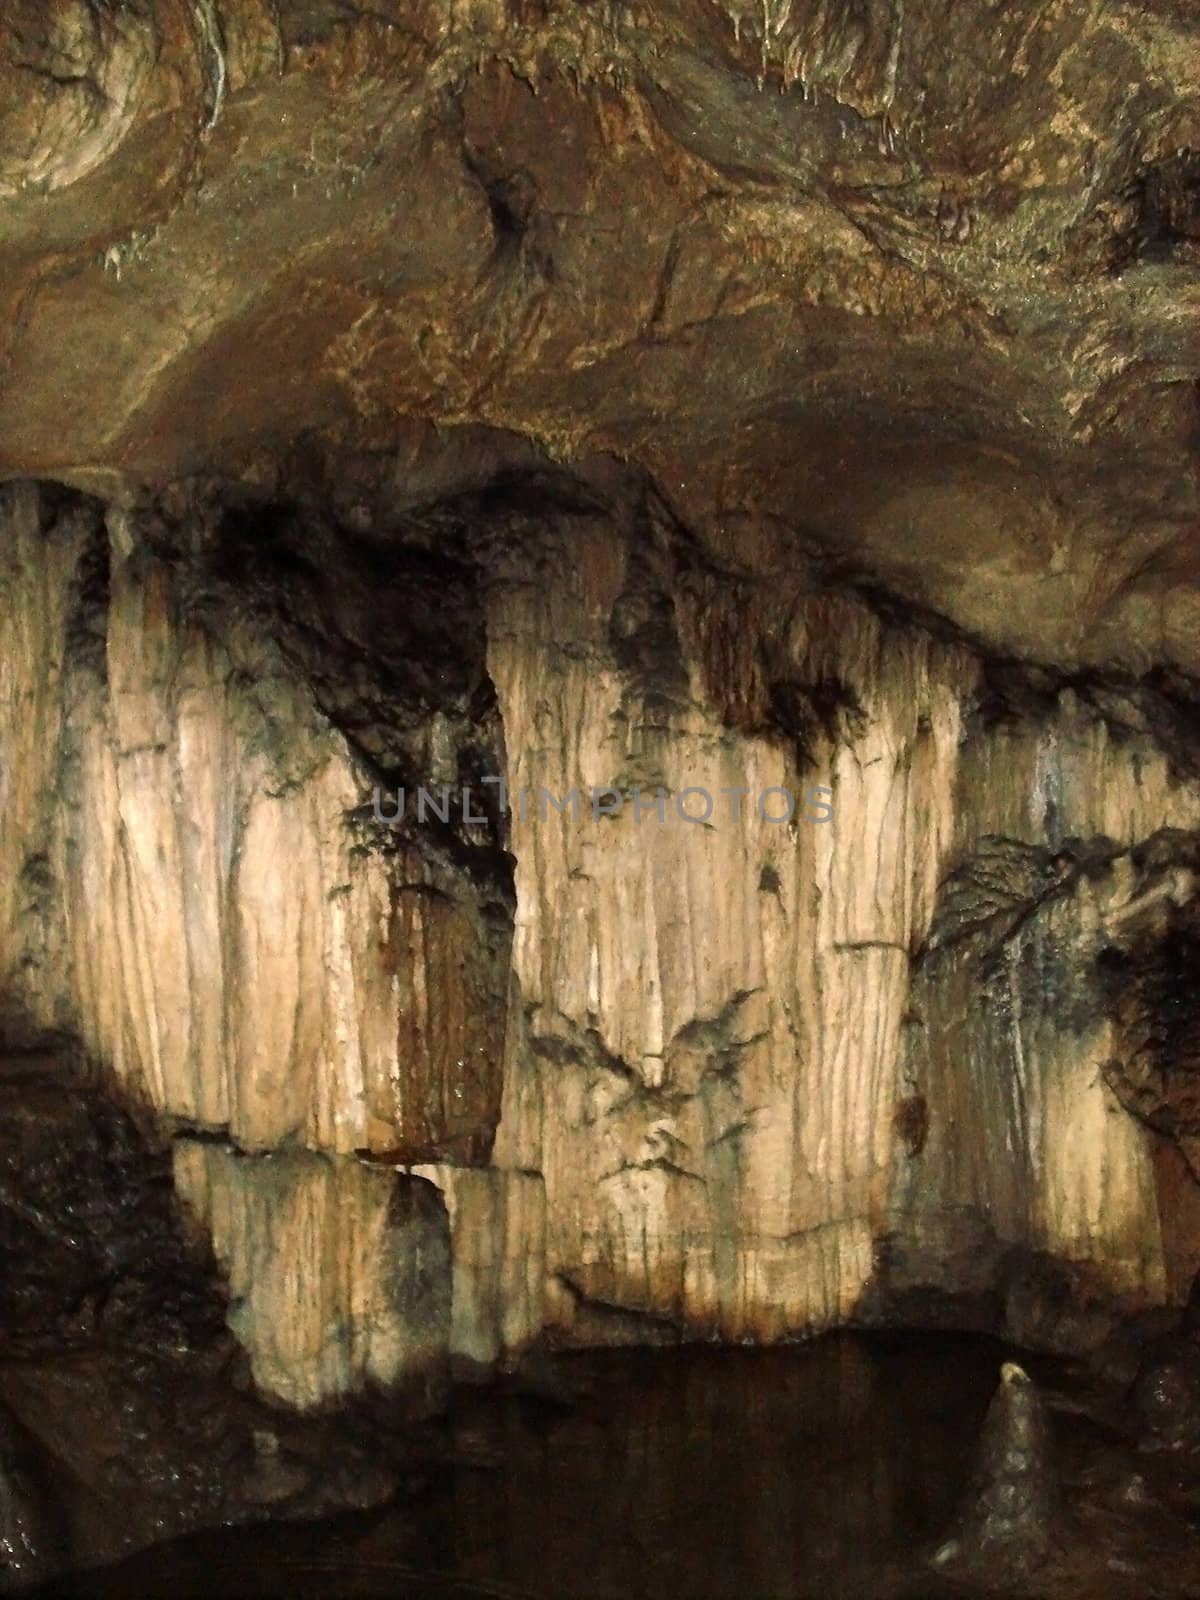 Greater, lake, a cave, cave, Caucasus, Caucasian, reserve, the nature, natural, the south, travel, rest to have a rest                           